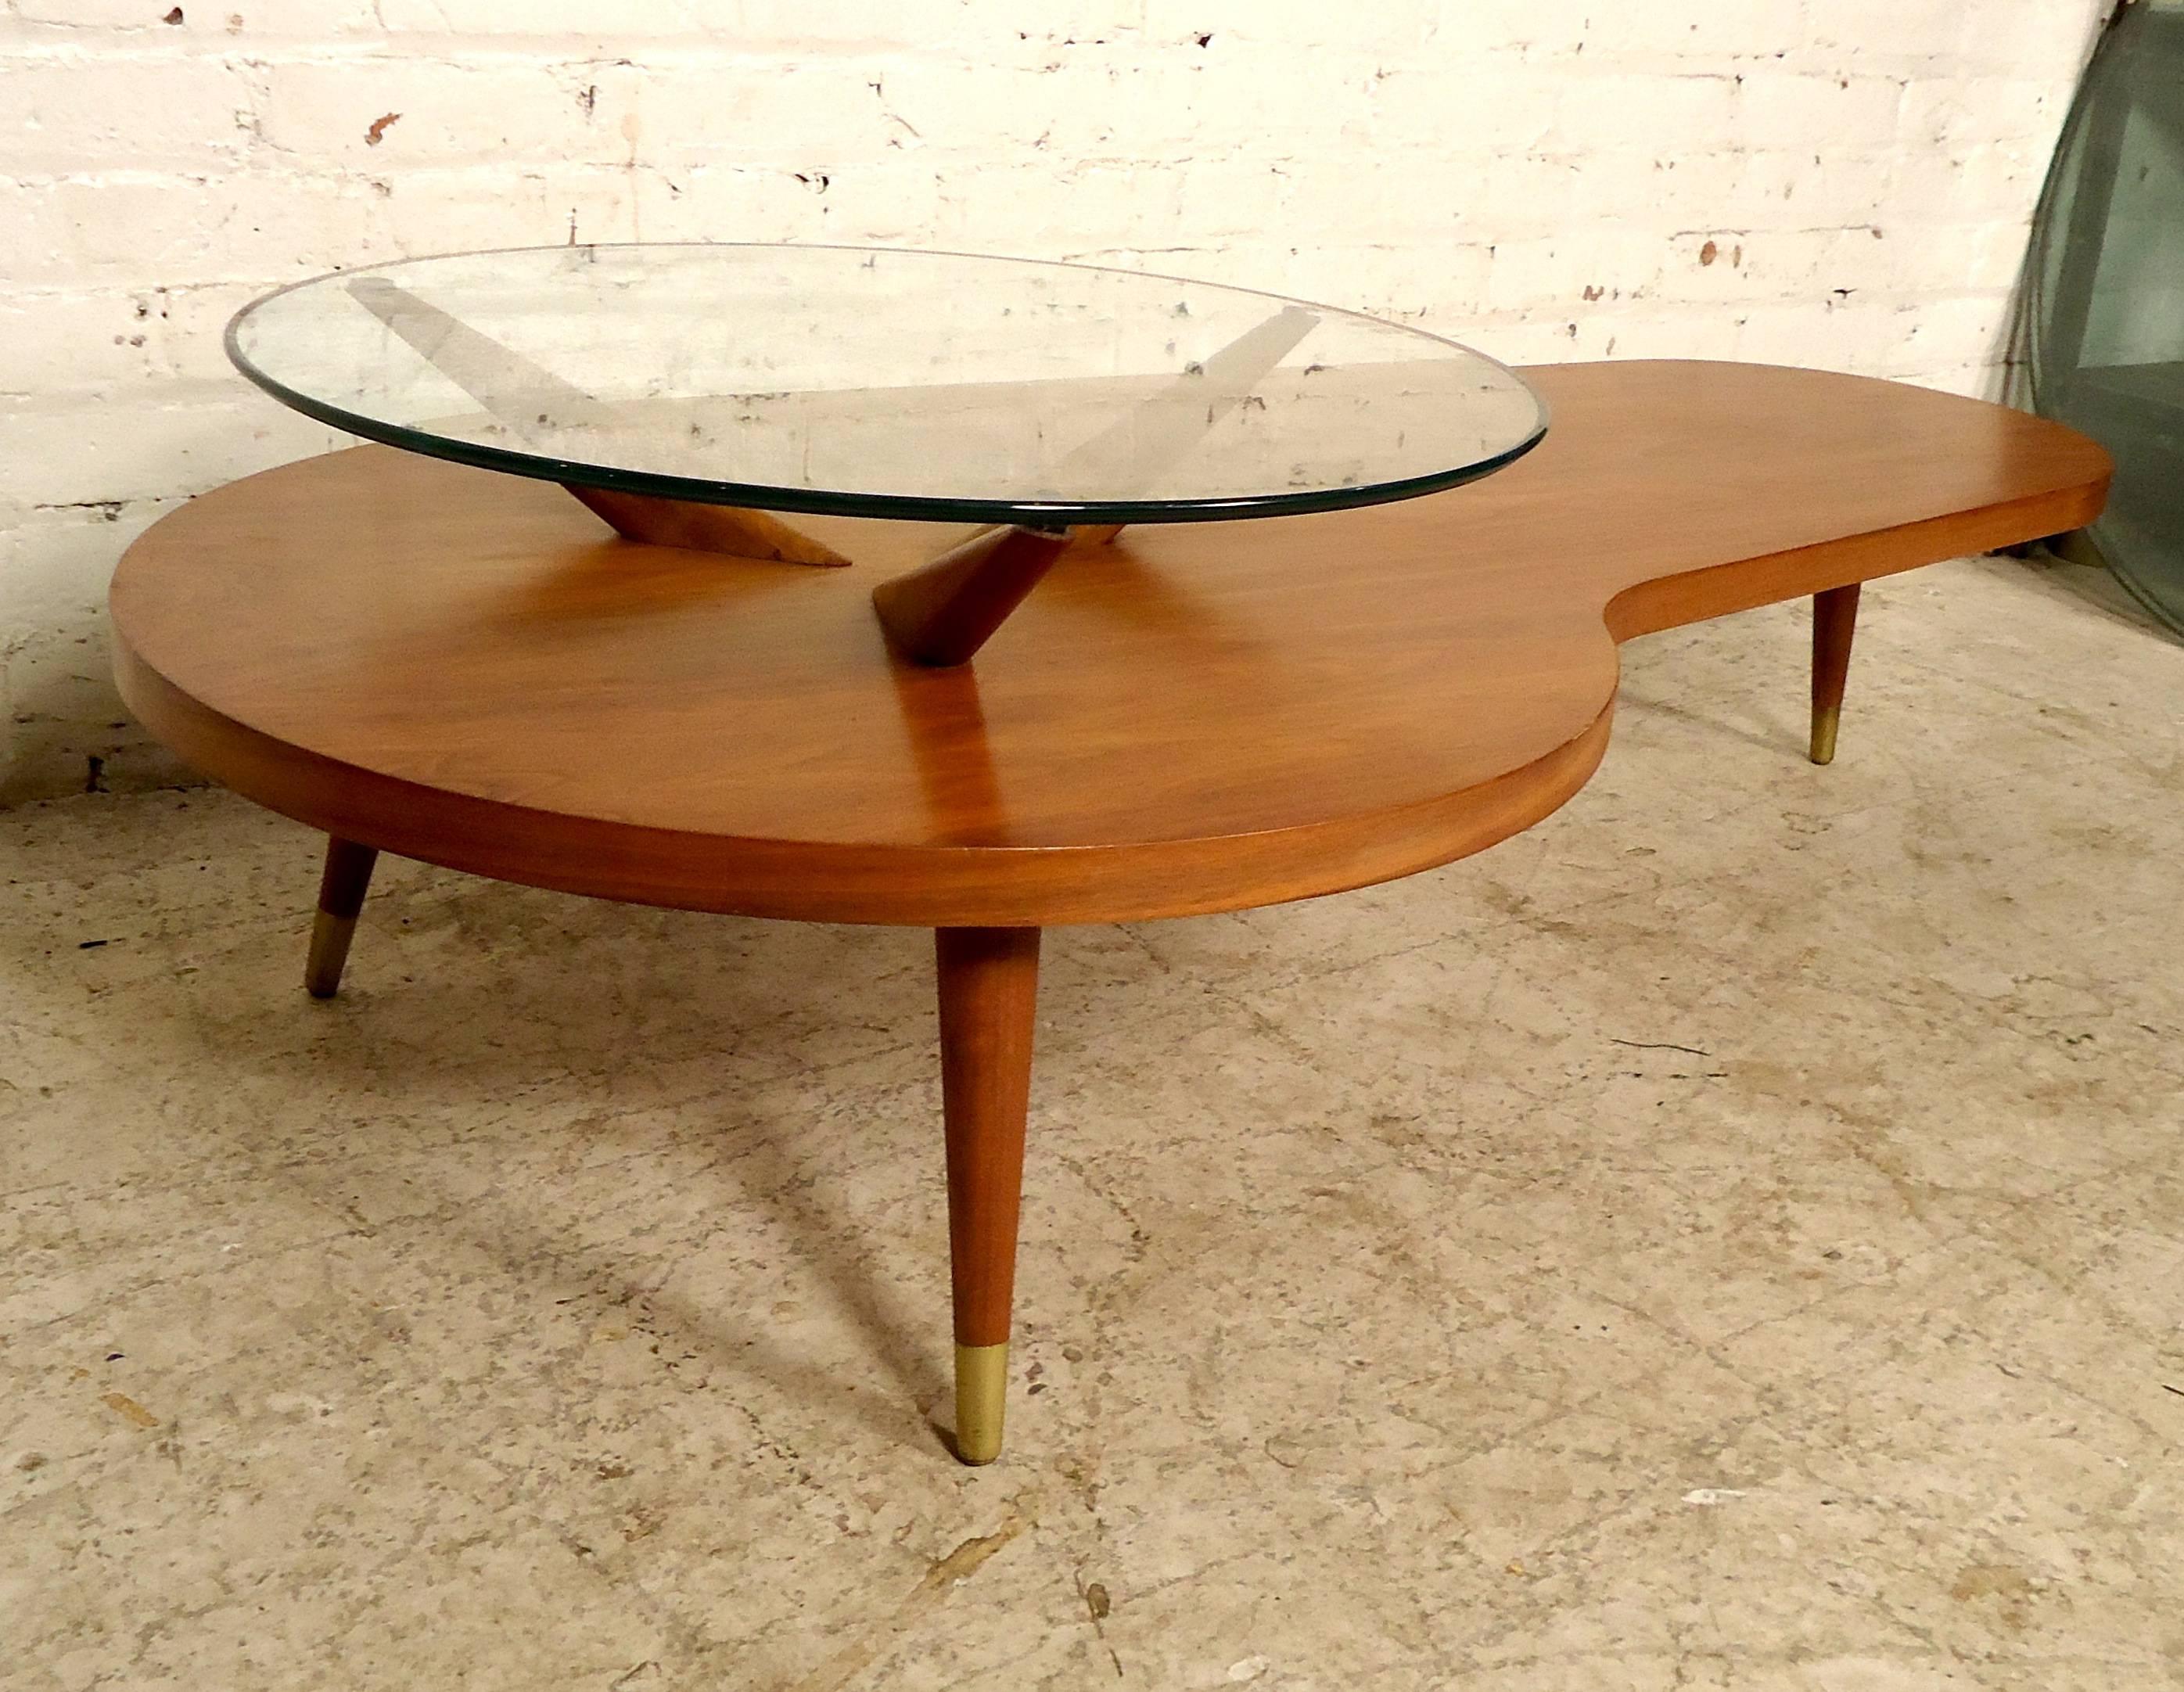 This very unique Mid-Century Modern coffee table features two-tiers, one glass top elevated above a kidney shaped bottom tier on a set of three tapered legs.

Please confirm item location (NY or NJ).